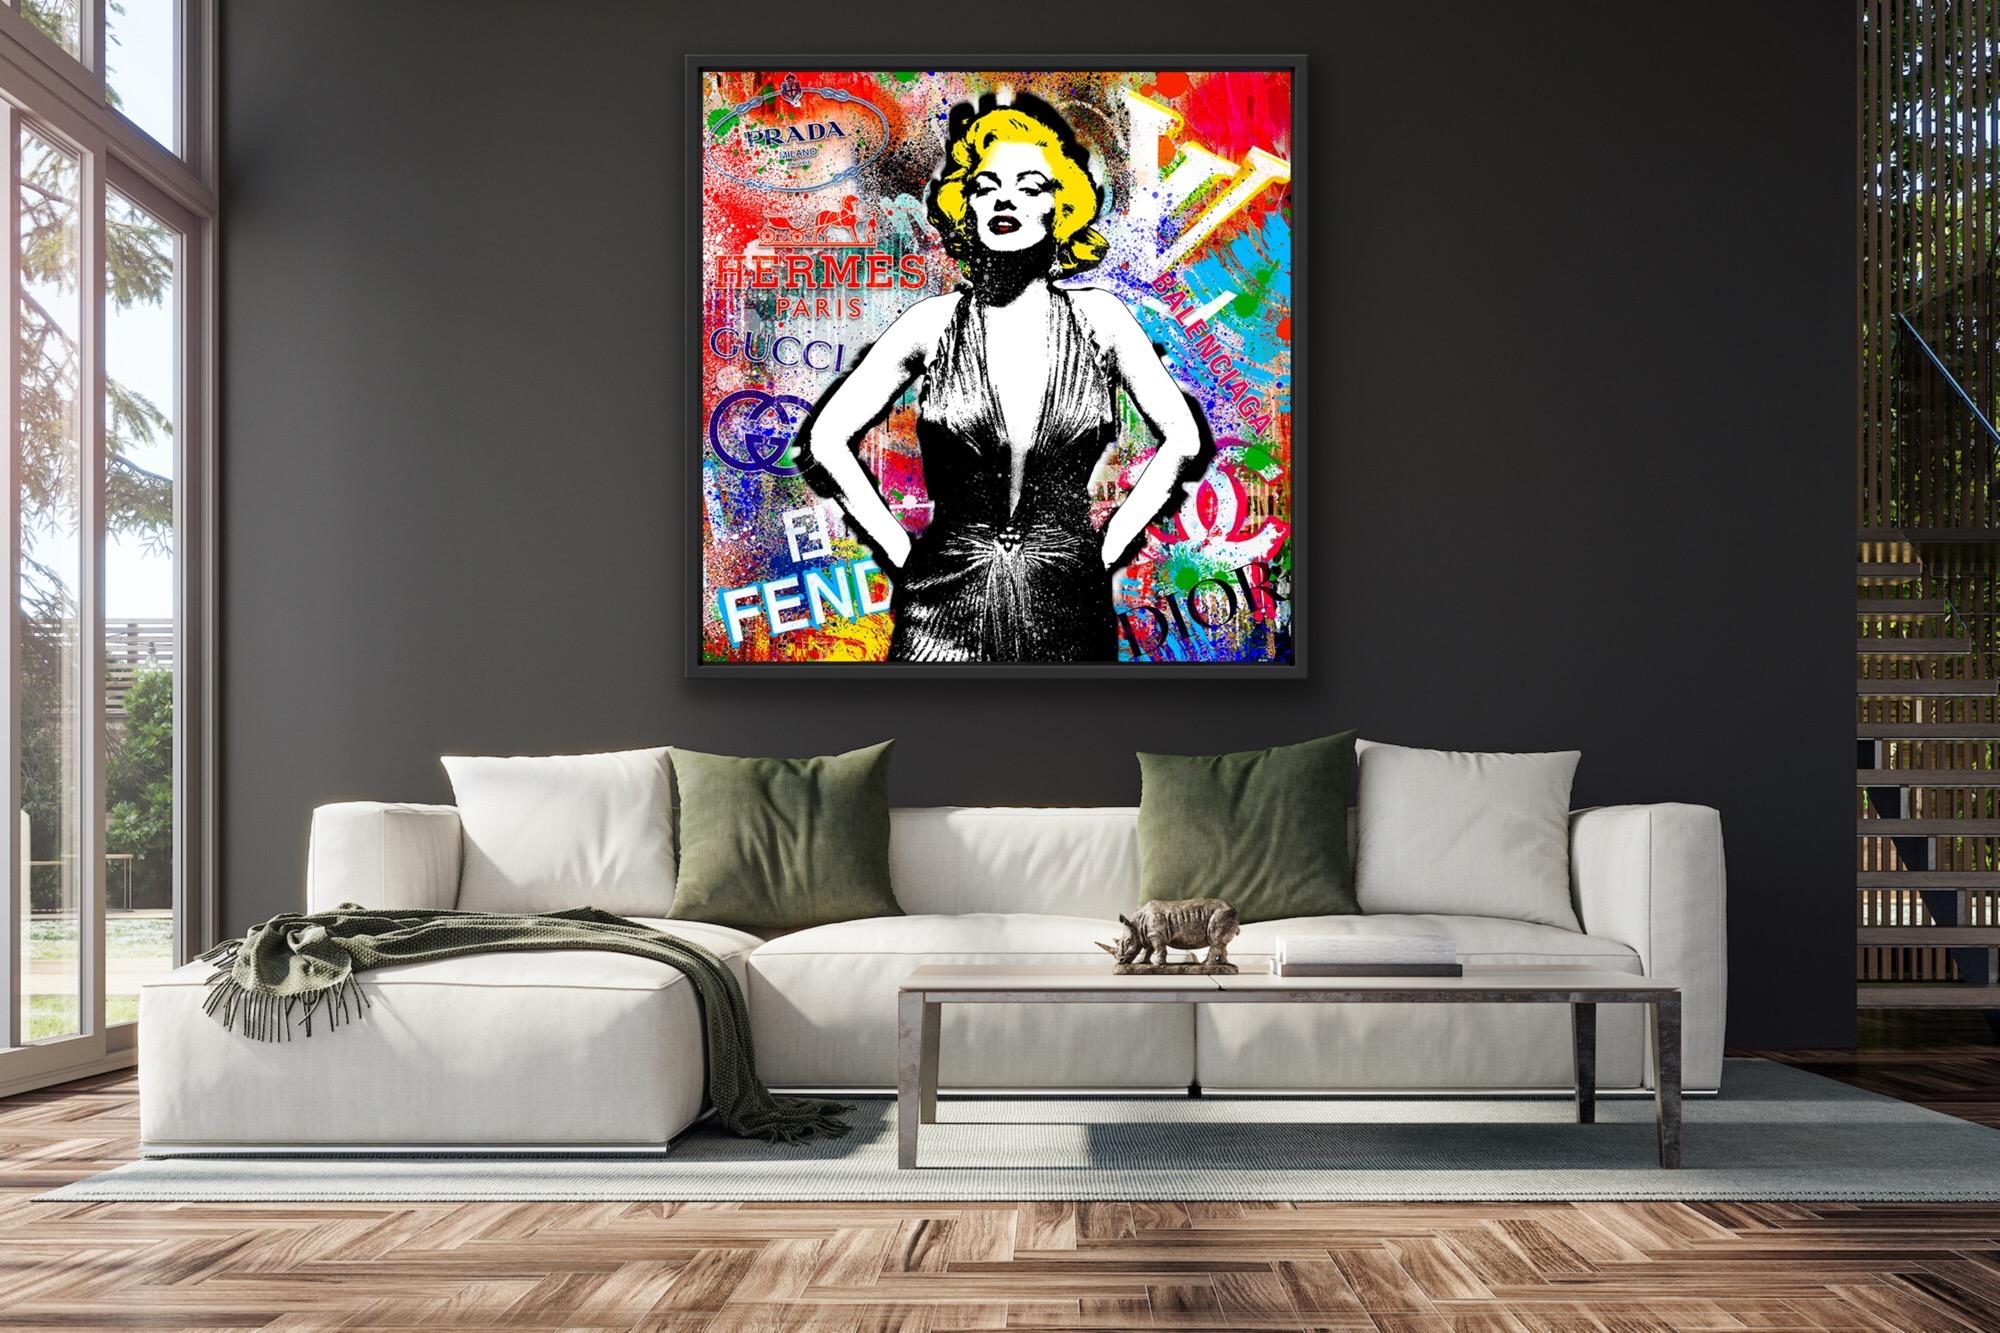 Marilyn as Vicky Debevoise, Famous Celebrity Artwork, Hollywood Art, Urban Art - Painting by Agent X